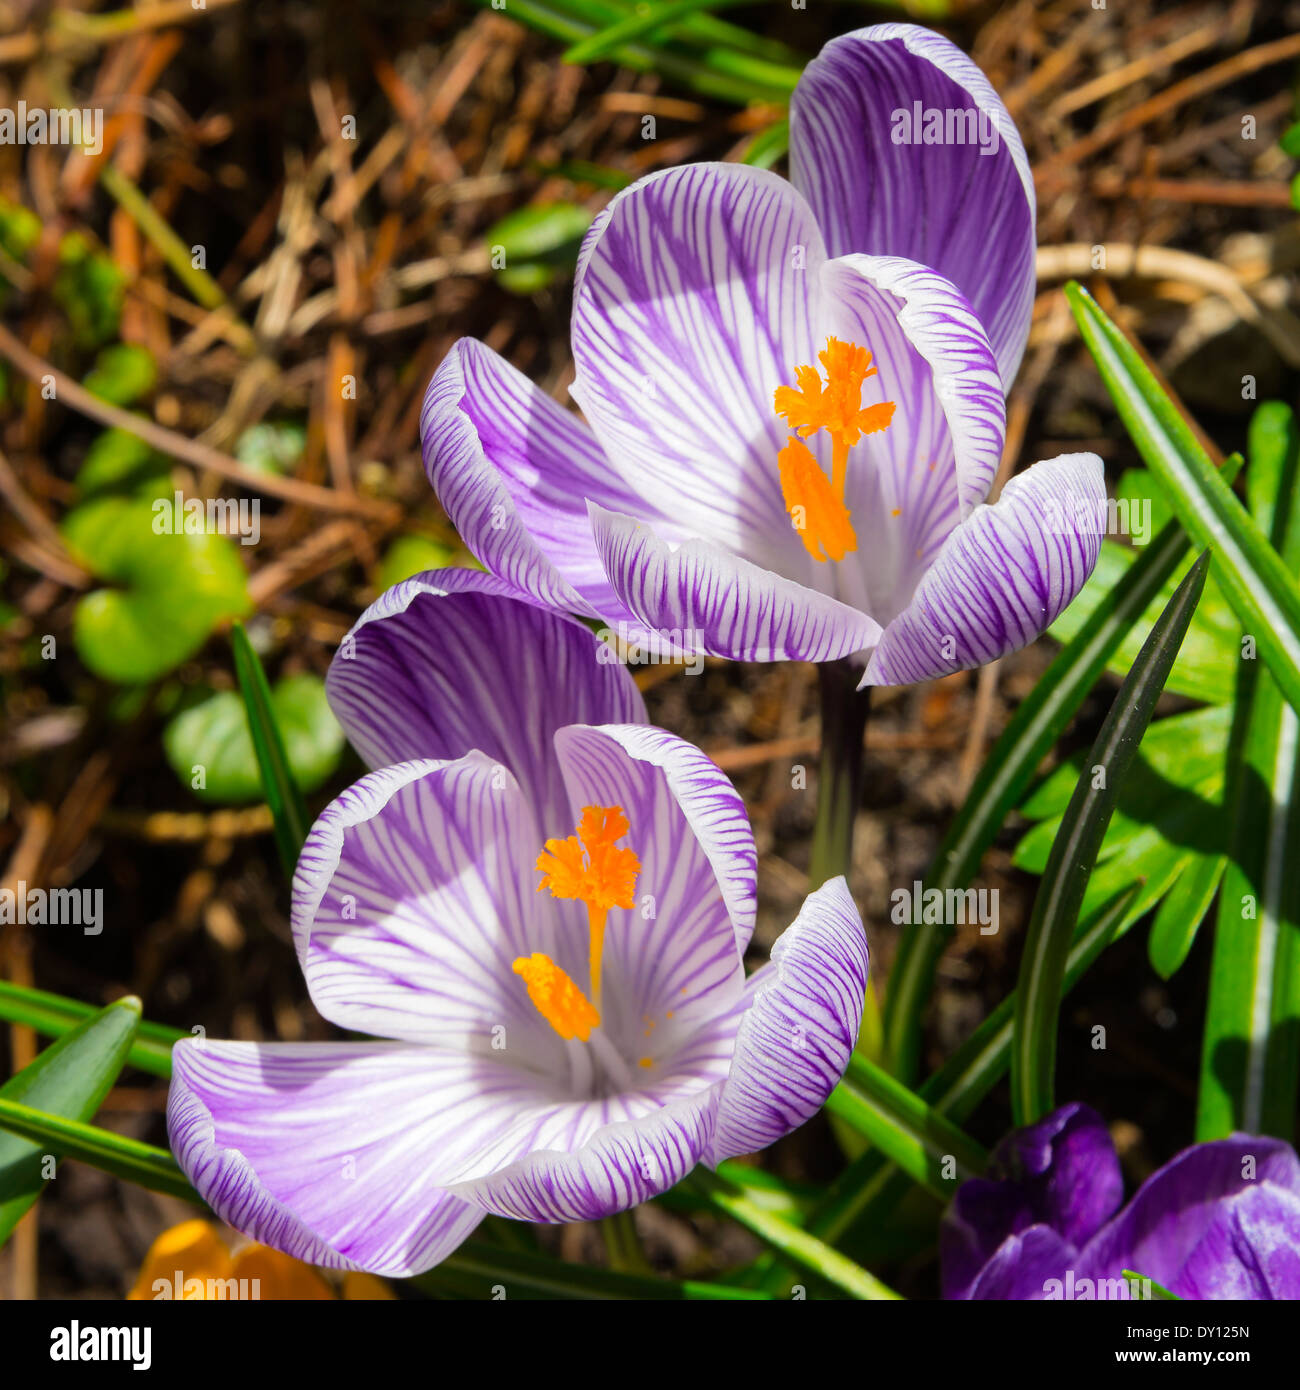 Crocus Flowers in Full Spring Bloom in a Cheshire Garden Alsager England United Kingdom UK Stock Photo